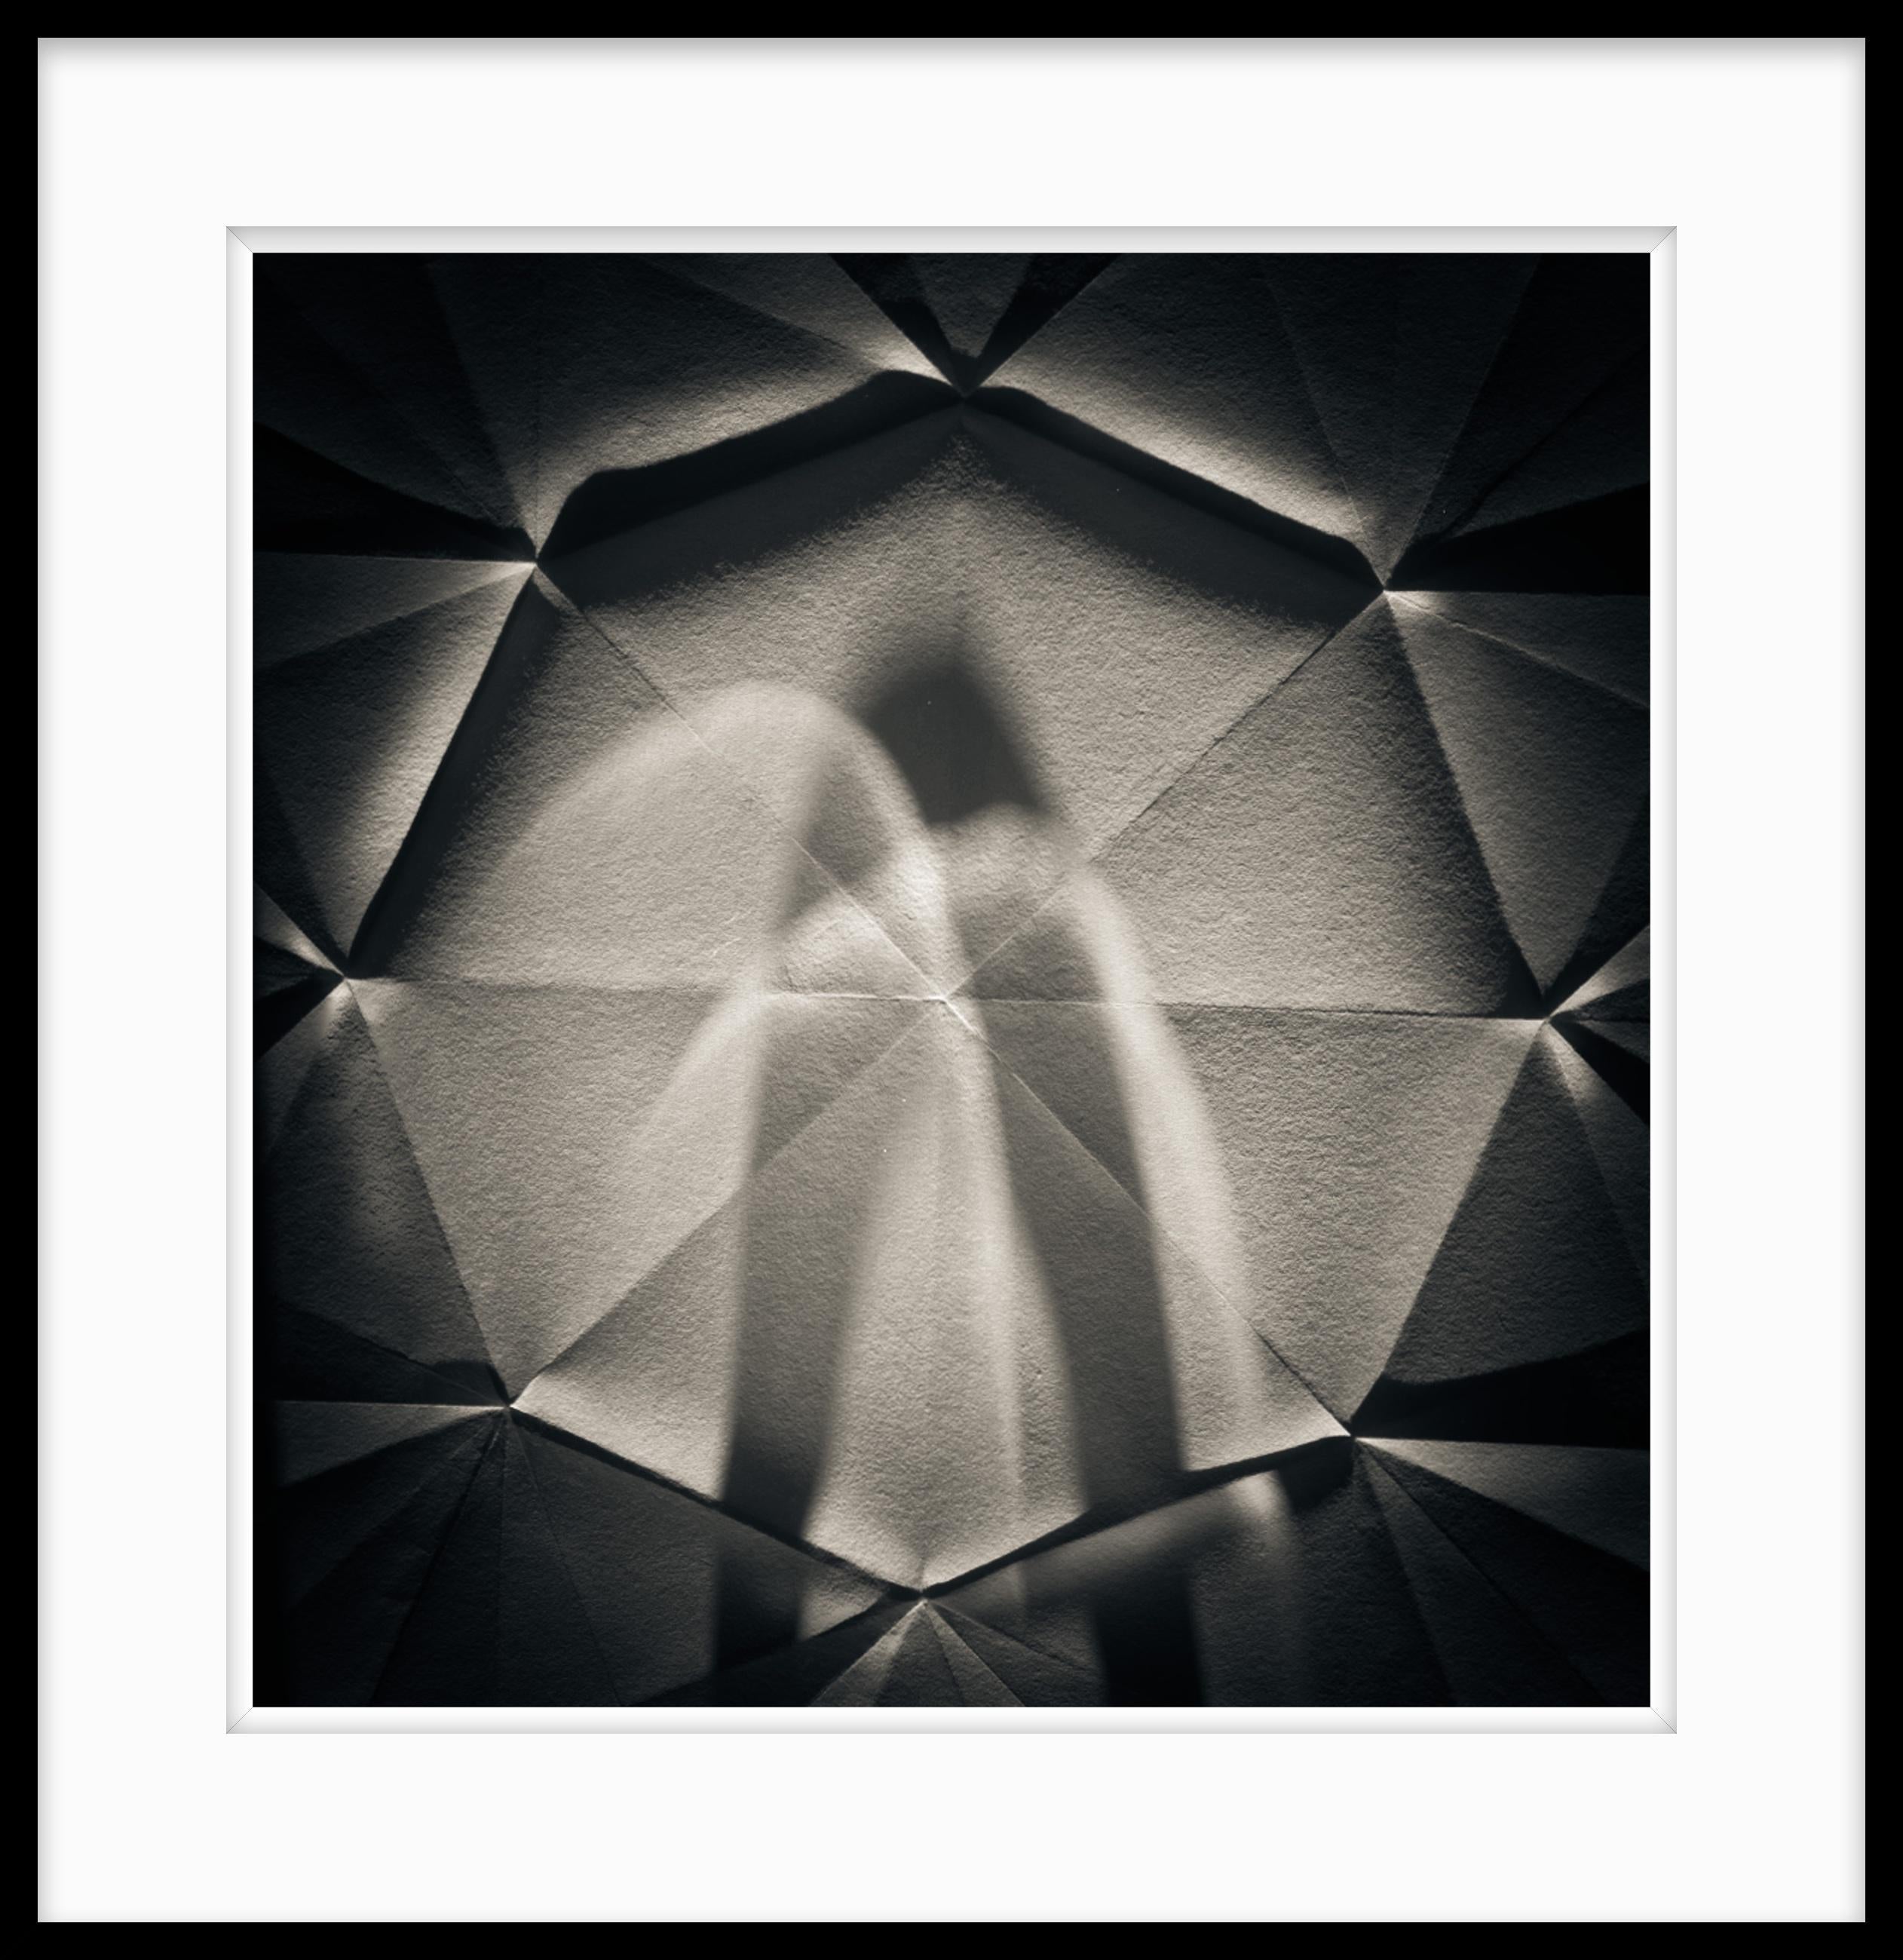 Limited Edition 1 / 10 20 x 24 Black and White Photograph - Origami Abstract #73 For Sale 1